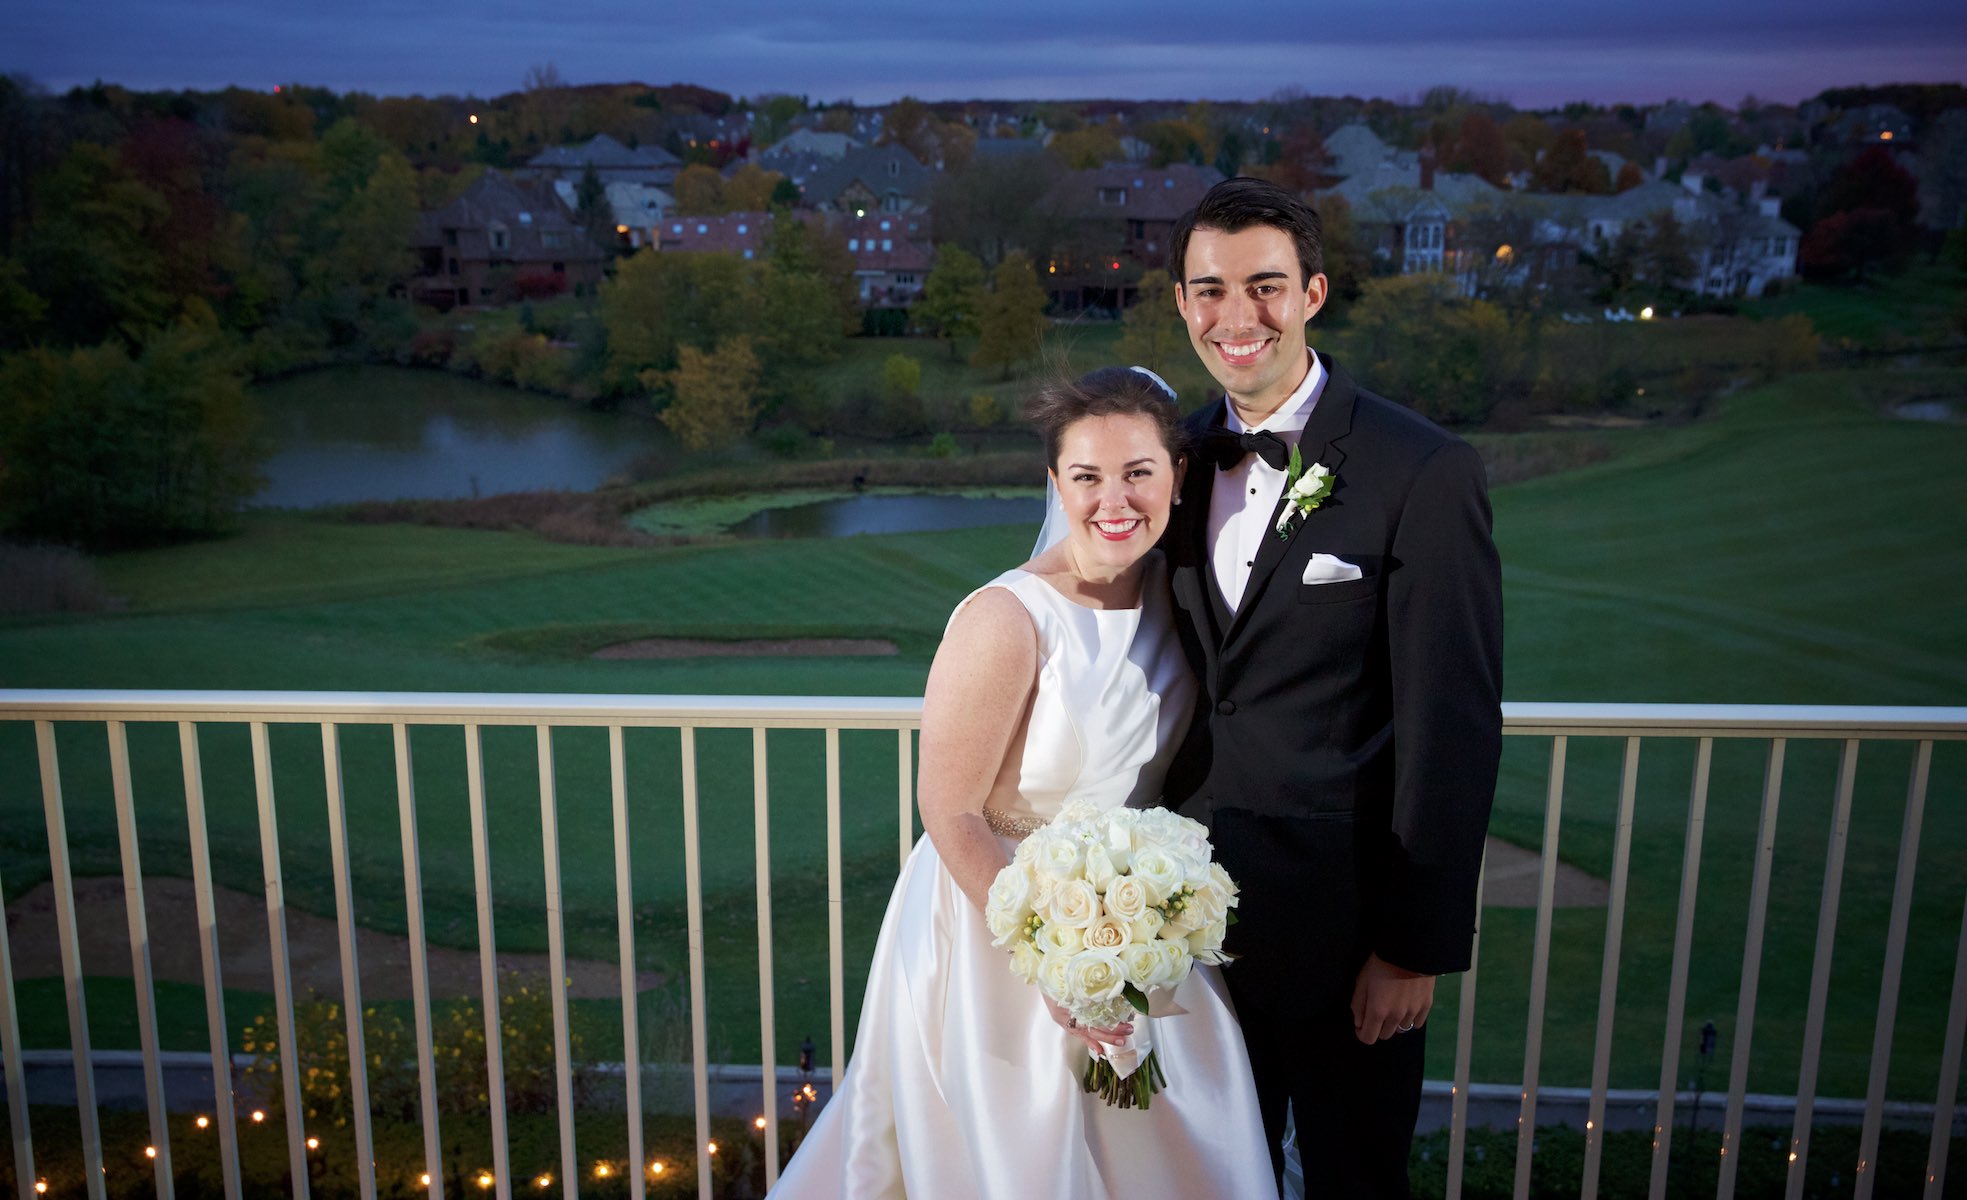 Outdoor portrait showing the view at dusk at Crystal Tree Country Club, Orland Park. Wedding photography by Steve & Tiffany Warmowski